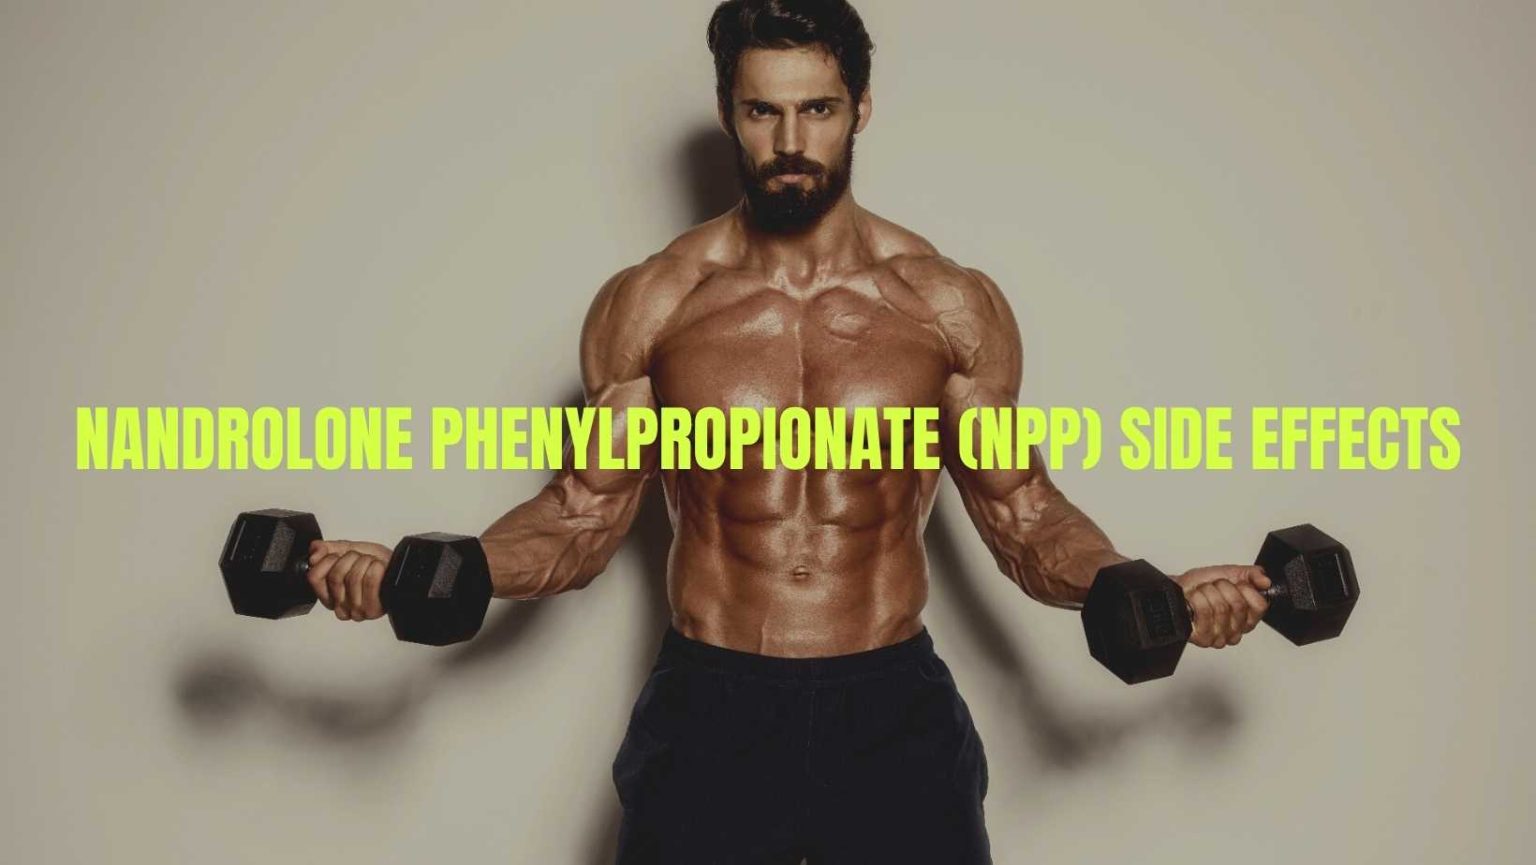 A Guide To Nandrolone Phenylpropionate Cycle Stacking And What To Expect